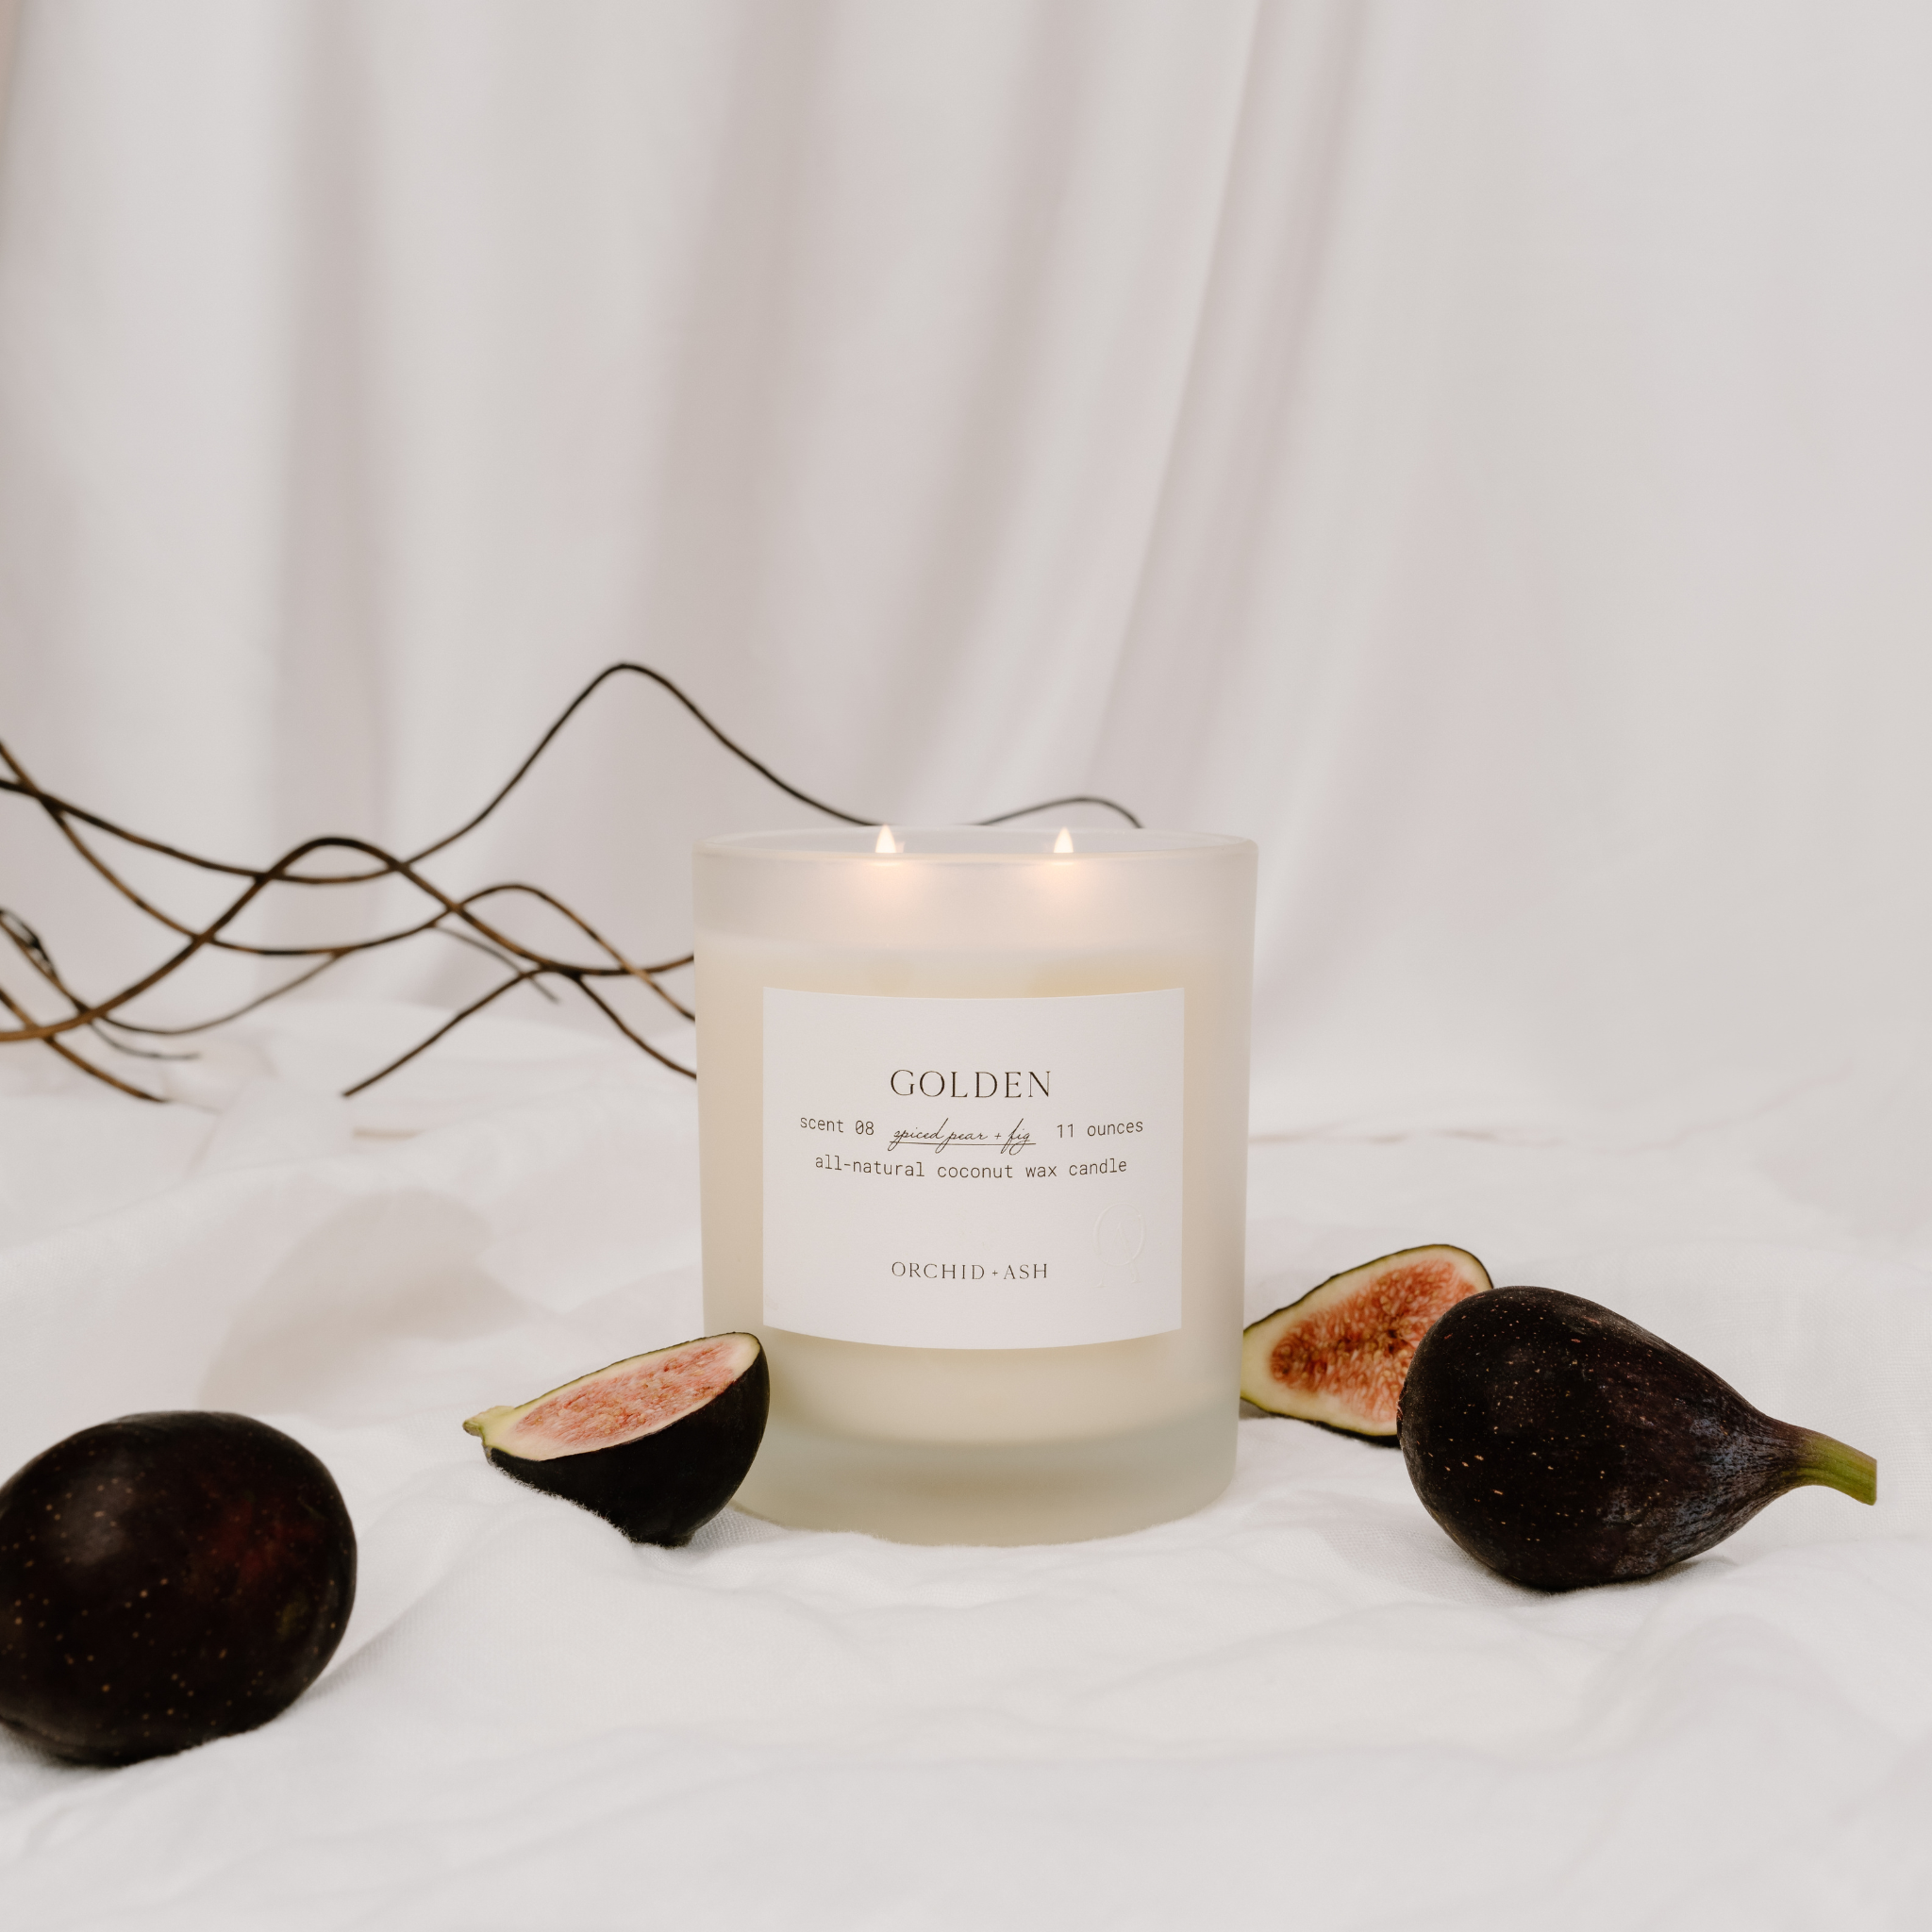 GOLDEN Natural Candle by Orchid + Ash